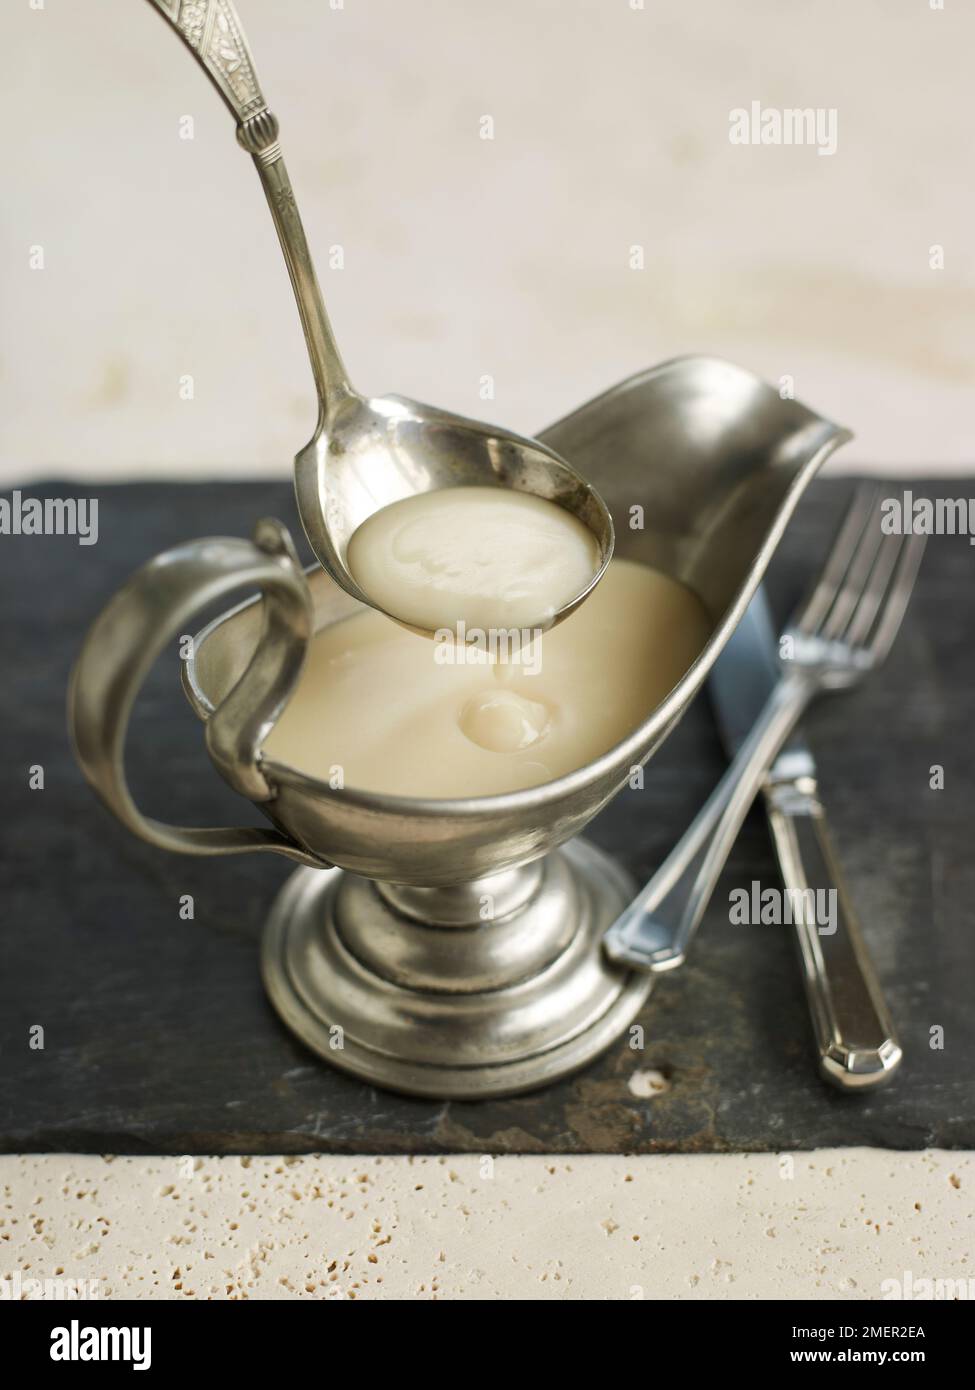 Veloute sauce in silver sauce boat and serving spoon or ladle Stock Photo